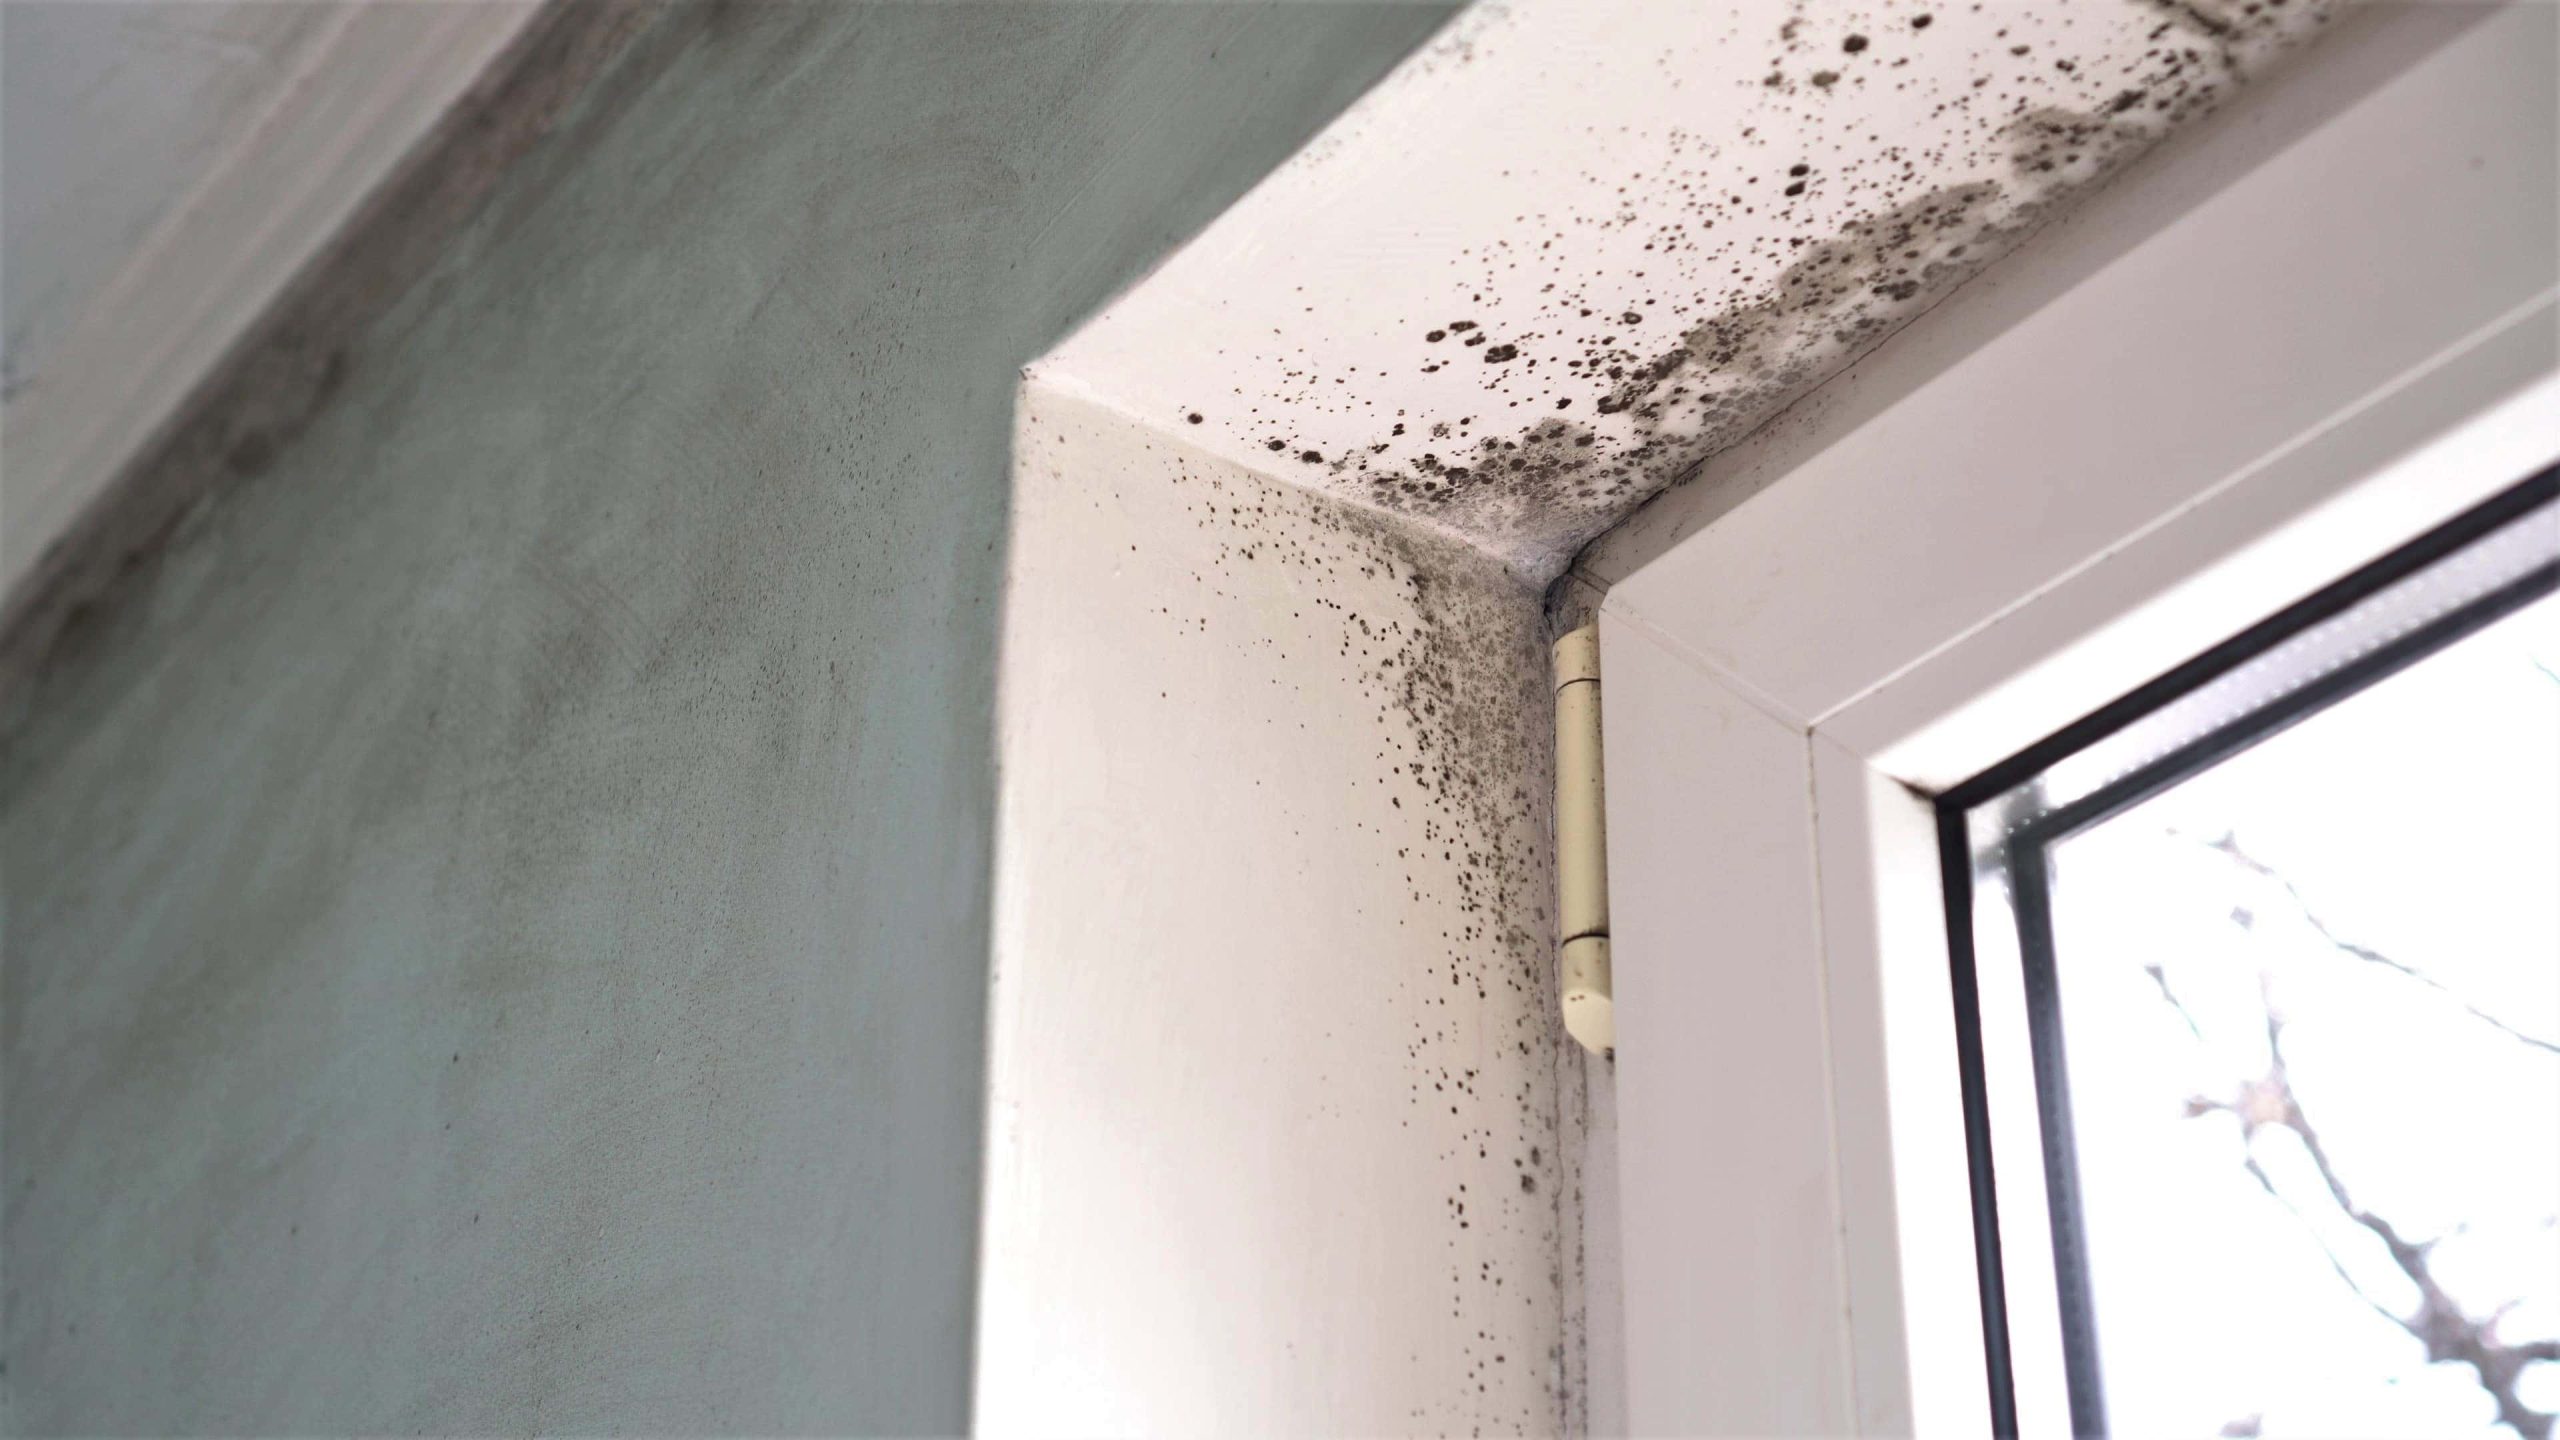 Trivallis Housing Landlord Wales Housing mold growth observed in the corner of a room where the ceiling meets the walls, near a window frame.